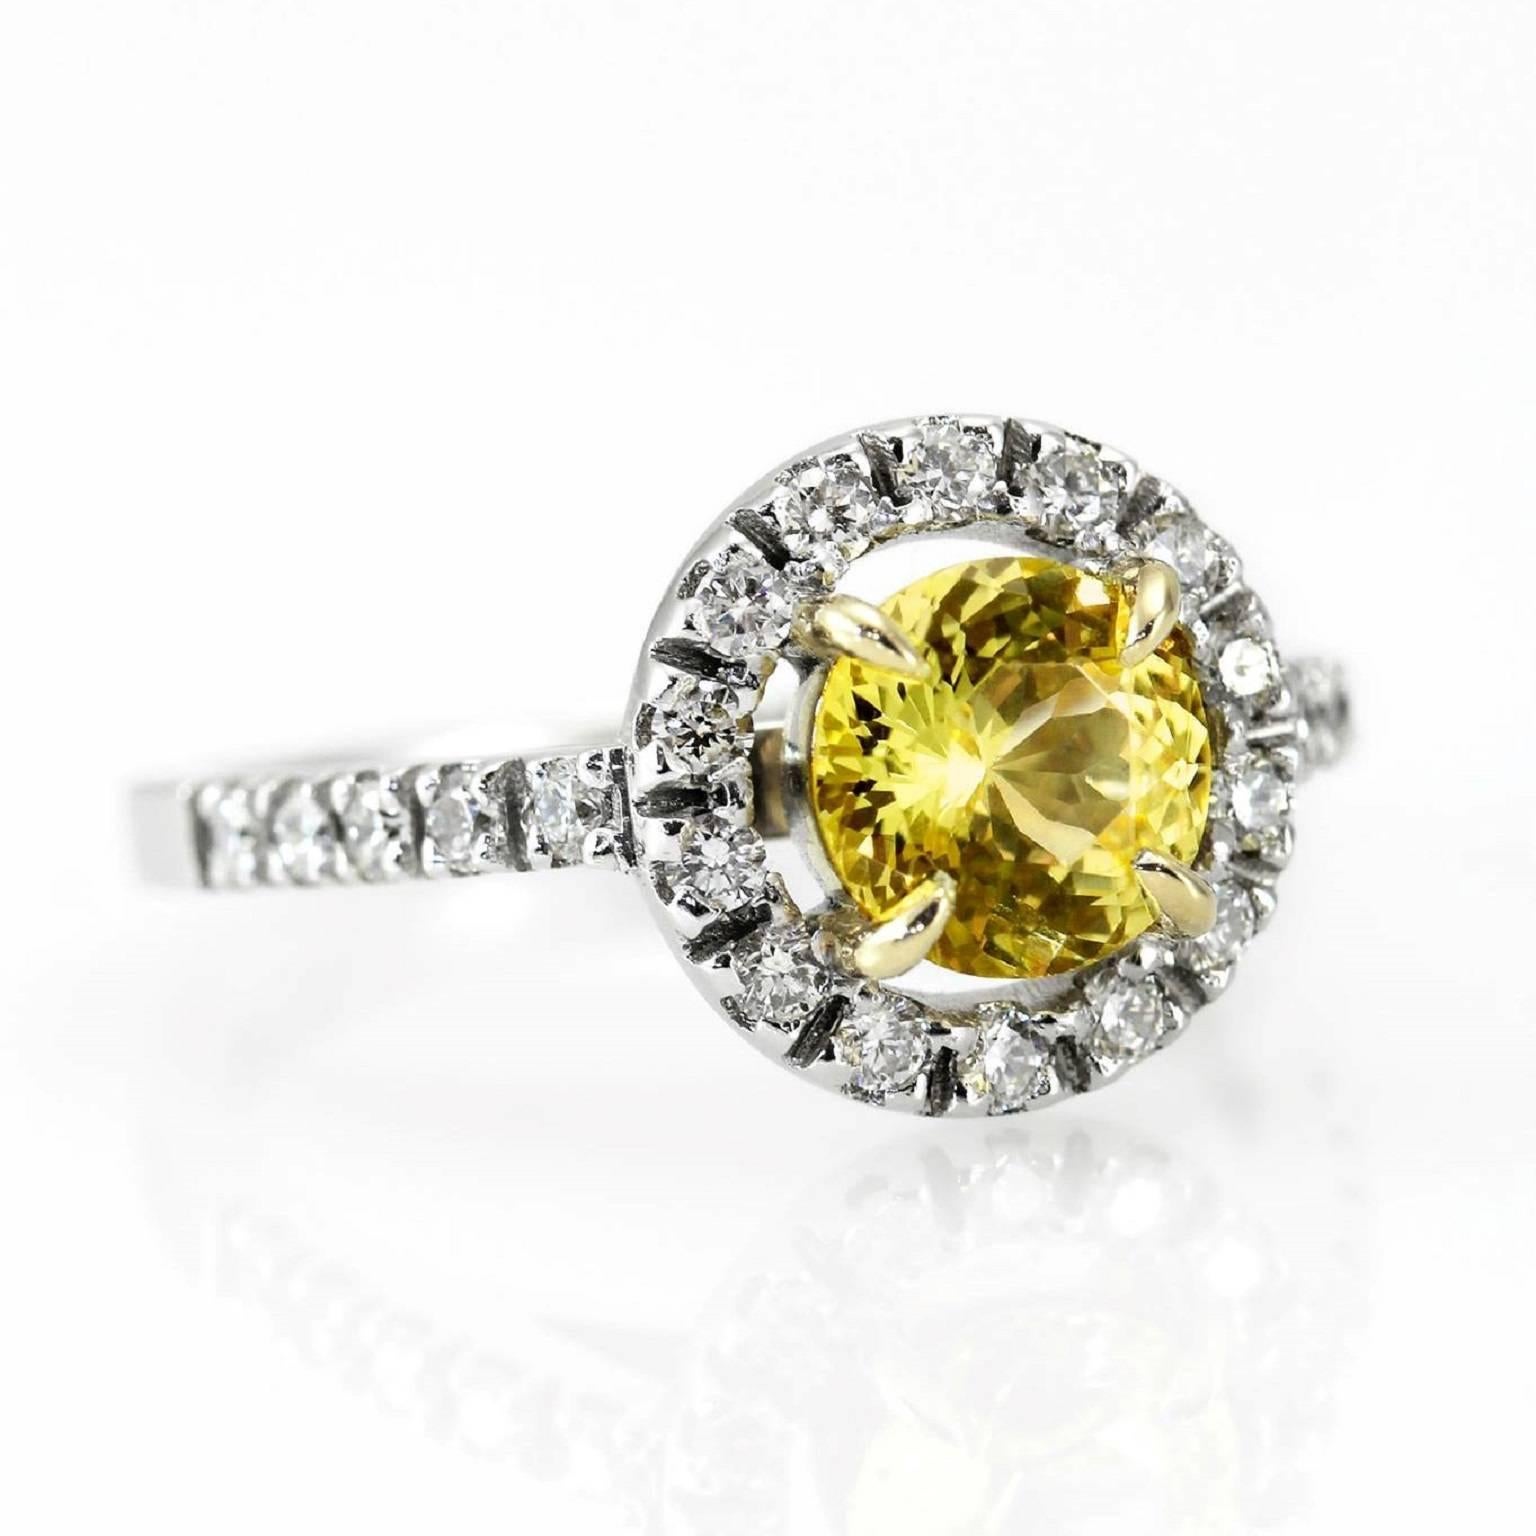 Round Cut 1.33 Carat Round Yellow Sapphire and Diamond Cluster Ring in 18 Carat Gold